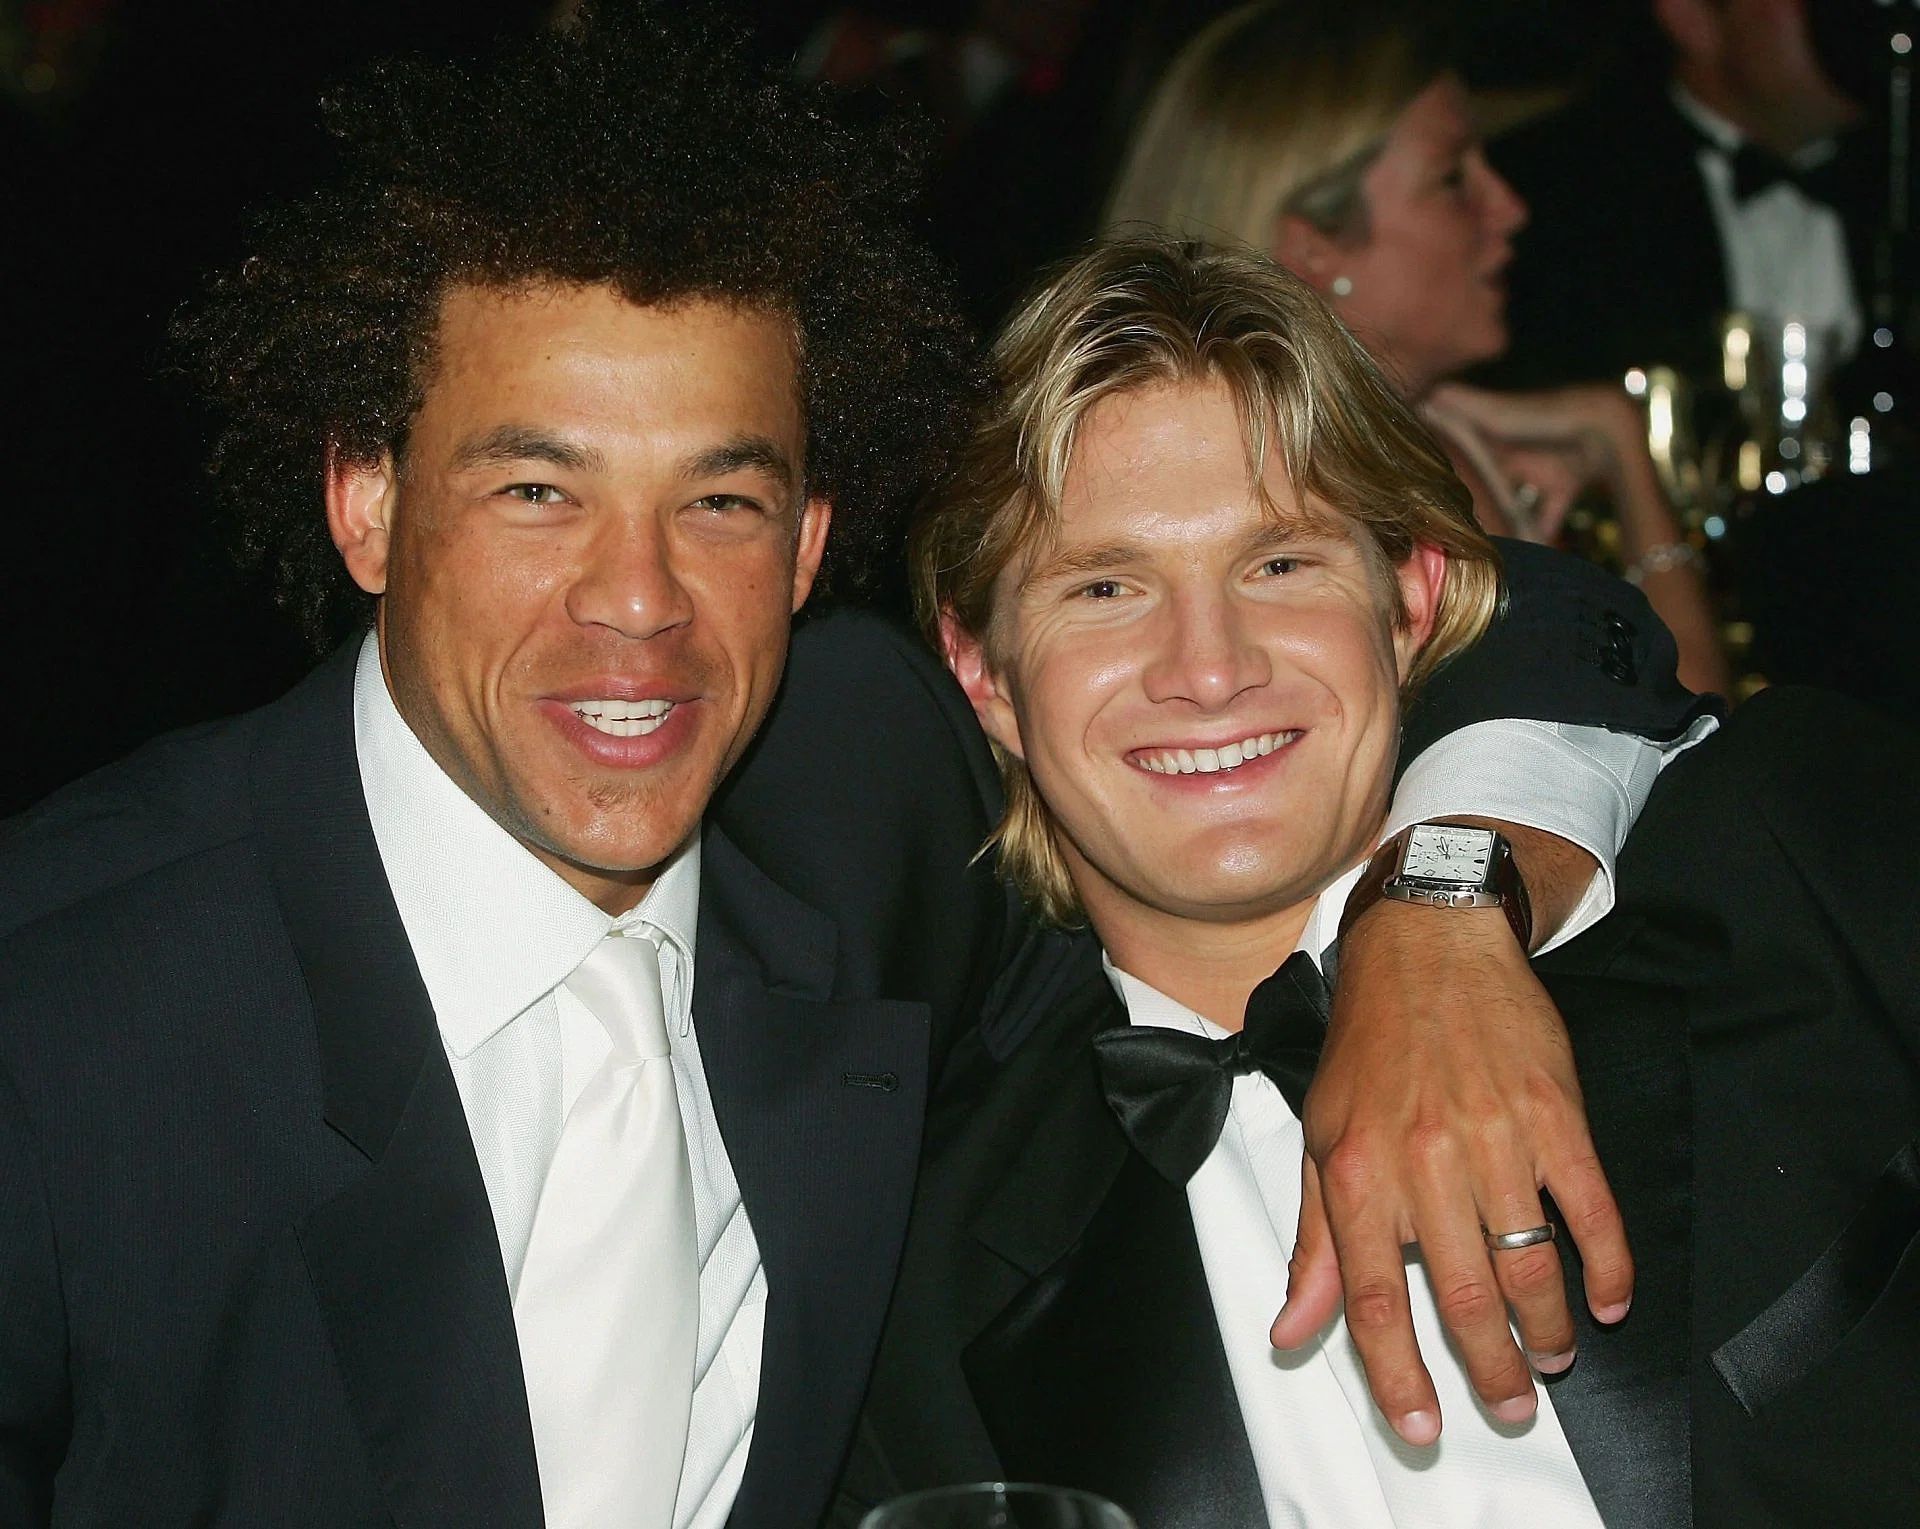 Andrew Symonds (left) and Shane Watson enjoy the dinner during the 2005 Allan Border Medal Dinner held at Crown Casino on January 31, 2005 in Melbourne, Australia. Pic: Getty Images